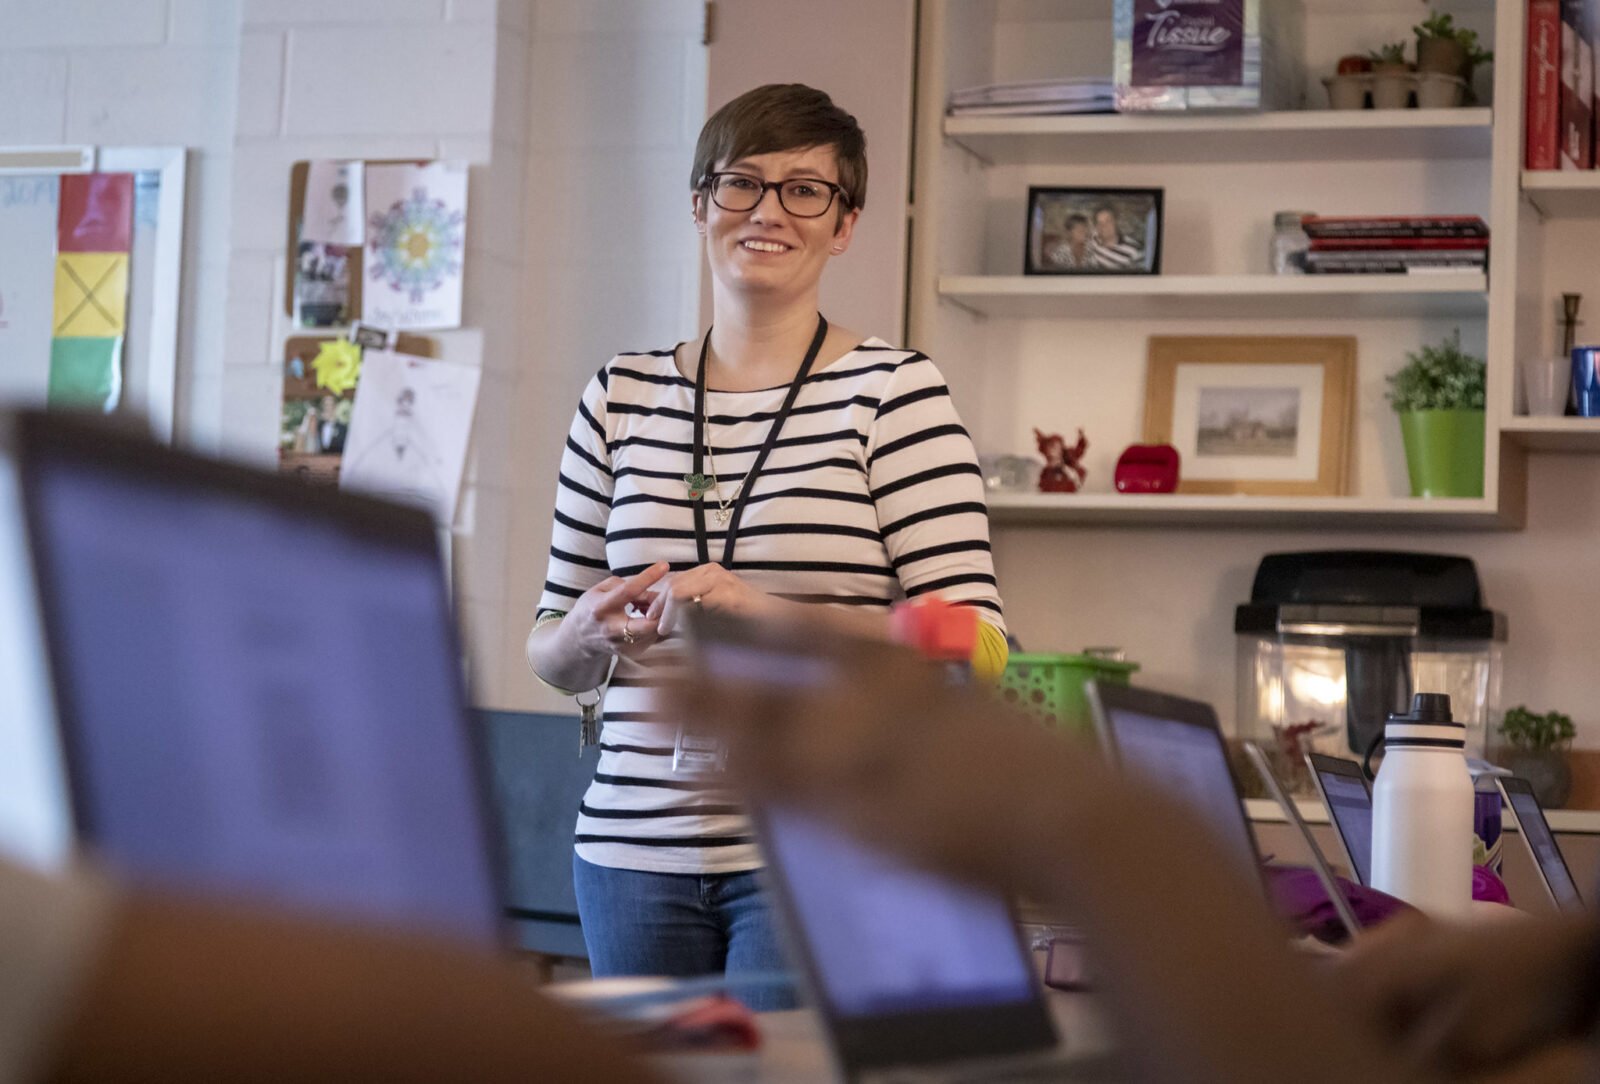 A teacher stands in front of a classroom of students on laptops. She's smiling at the group.